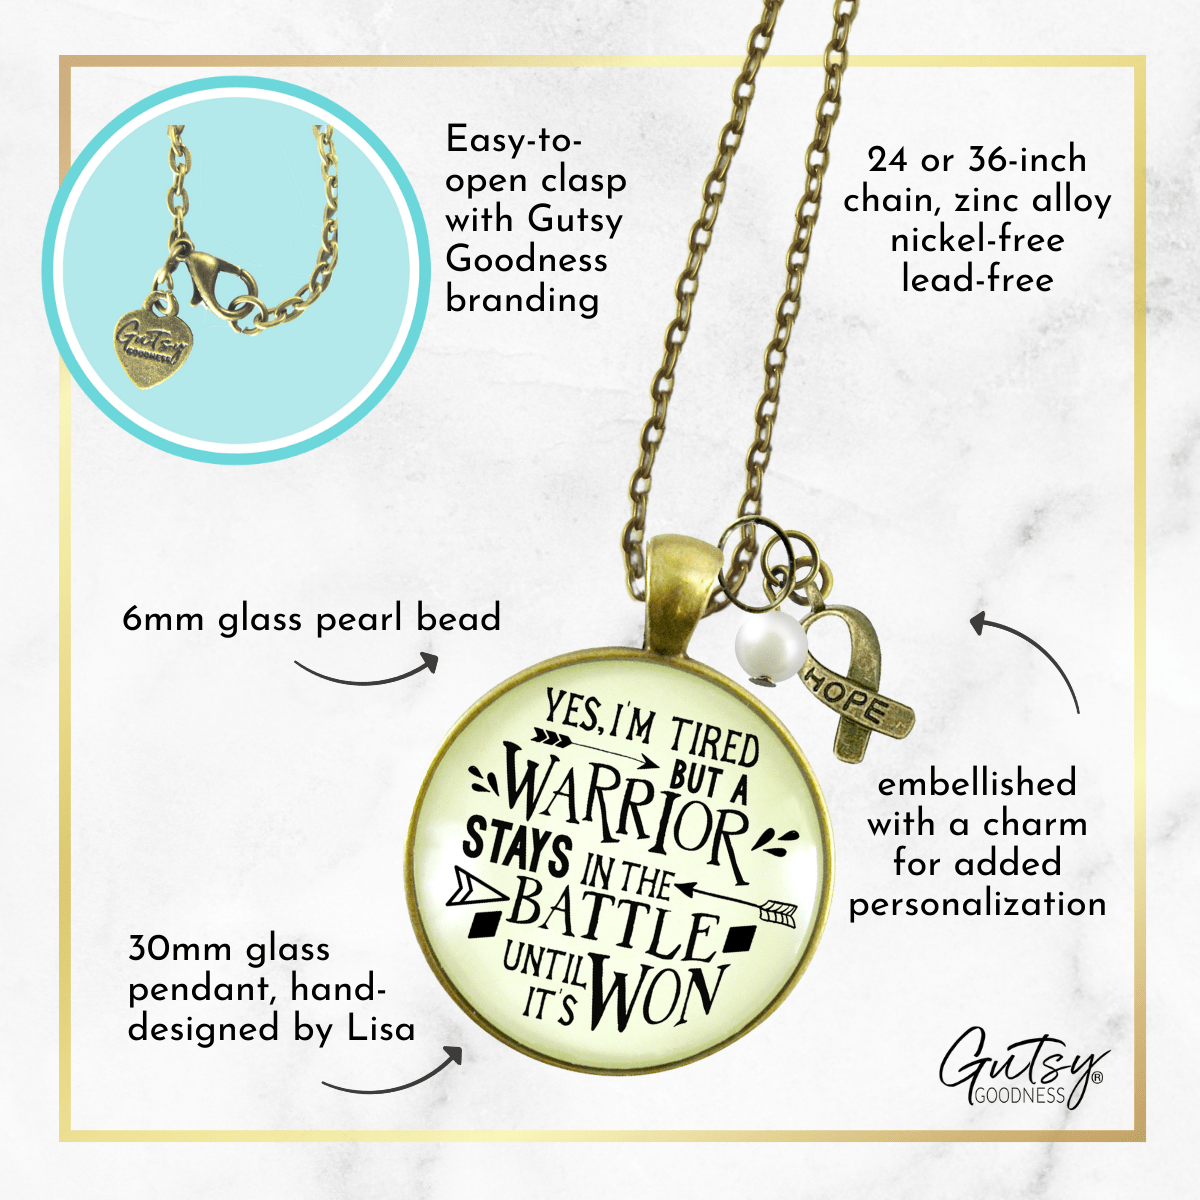 Gutsy Goodness Survivor Necklace Yes I Am Tired But a Warrior Strong Ribbon Jewelry - Gutsy Goodness Handmade Jewelry;Survivor Necklace Yes I Am Tired But A Warrior Strong Ribbon Jewelry - Gutsy Goodness Handmade Jewelry Gifts